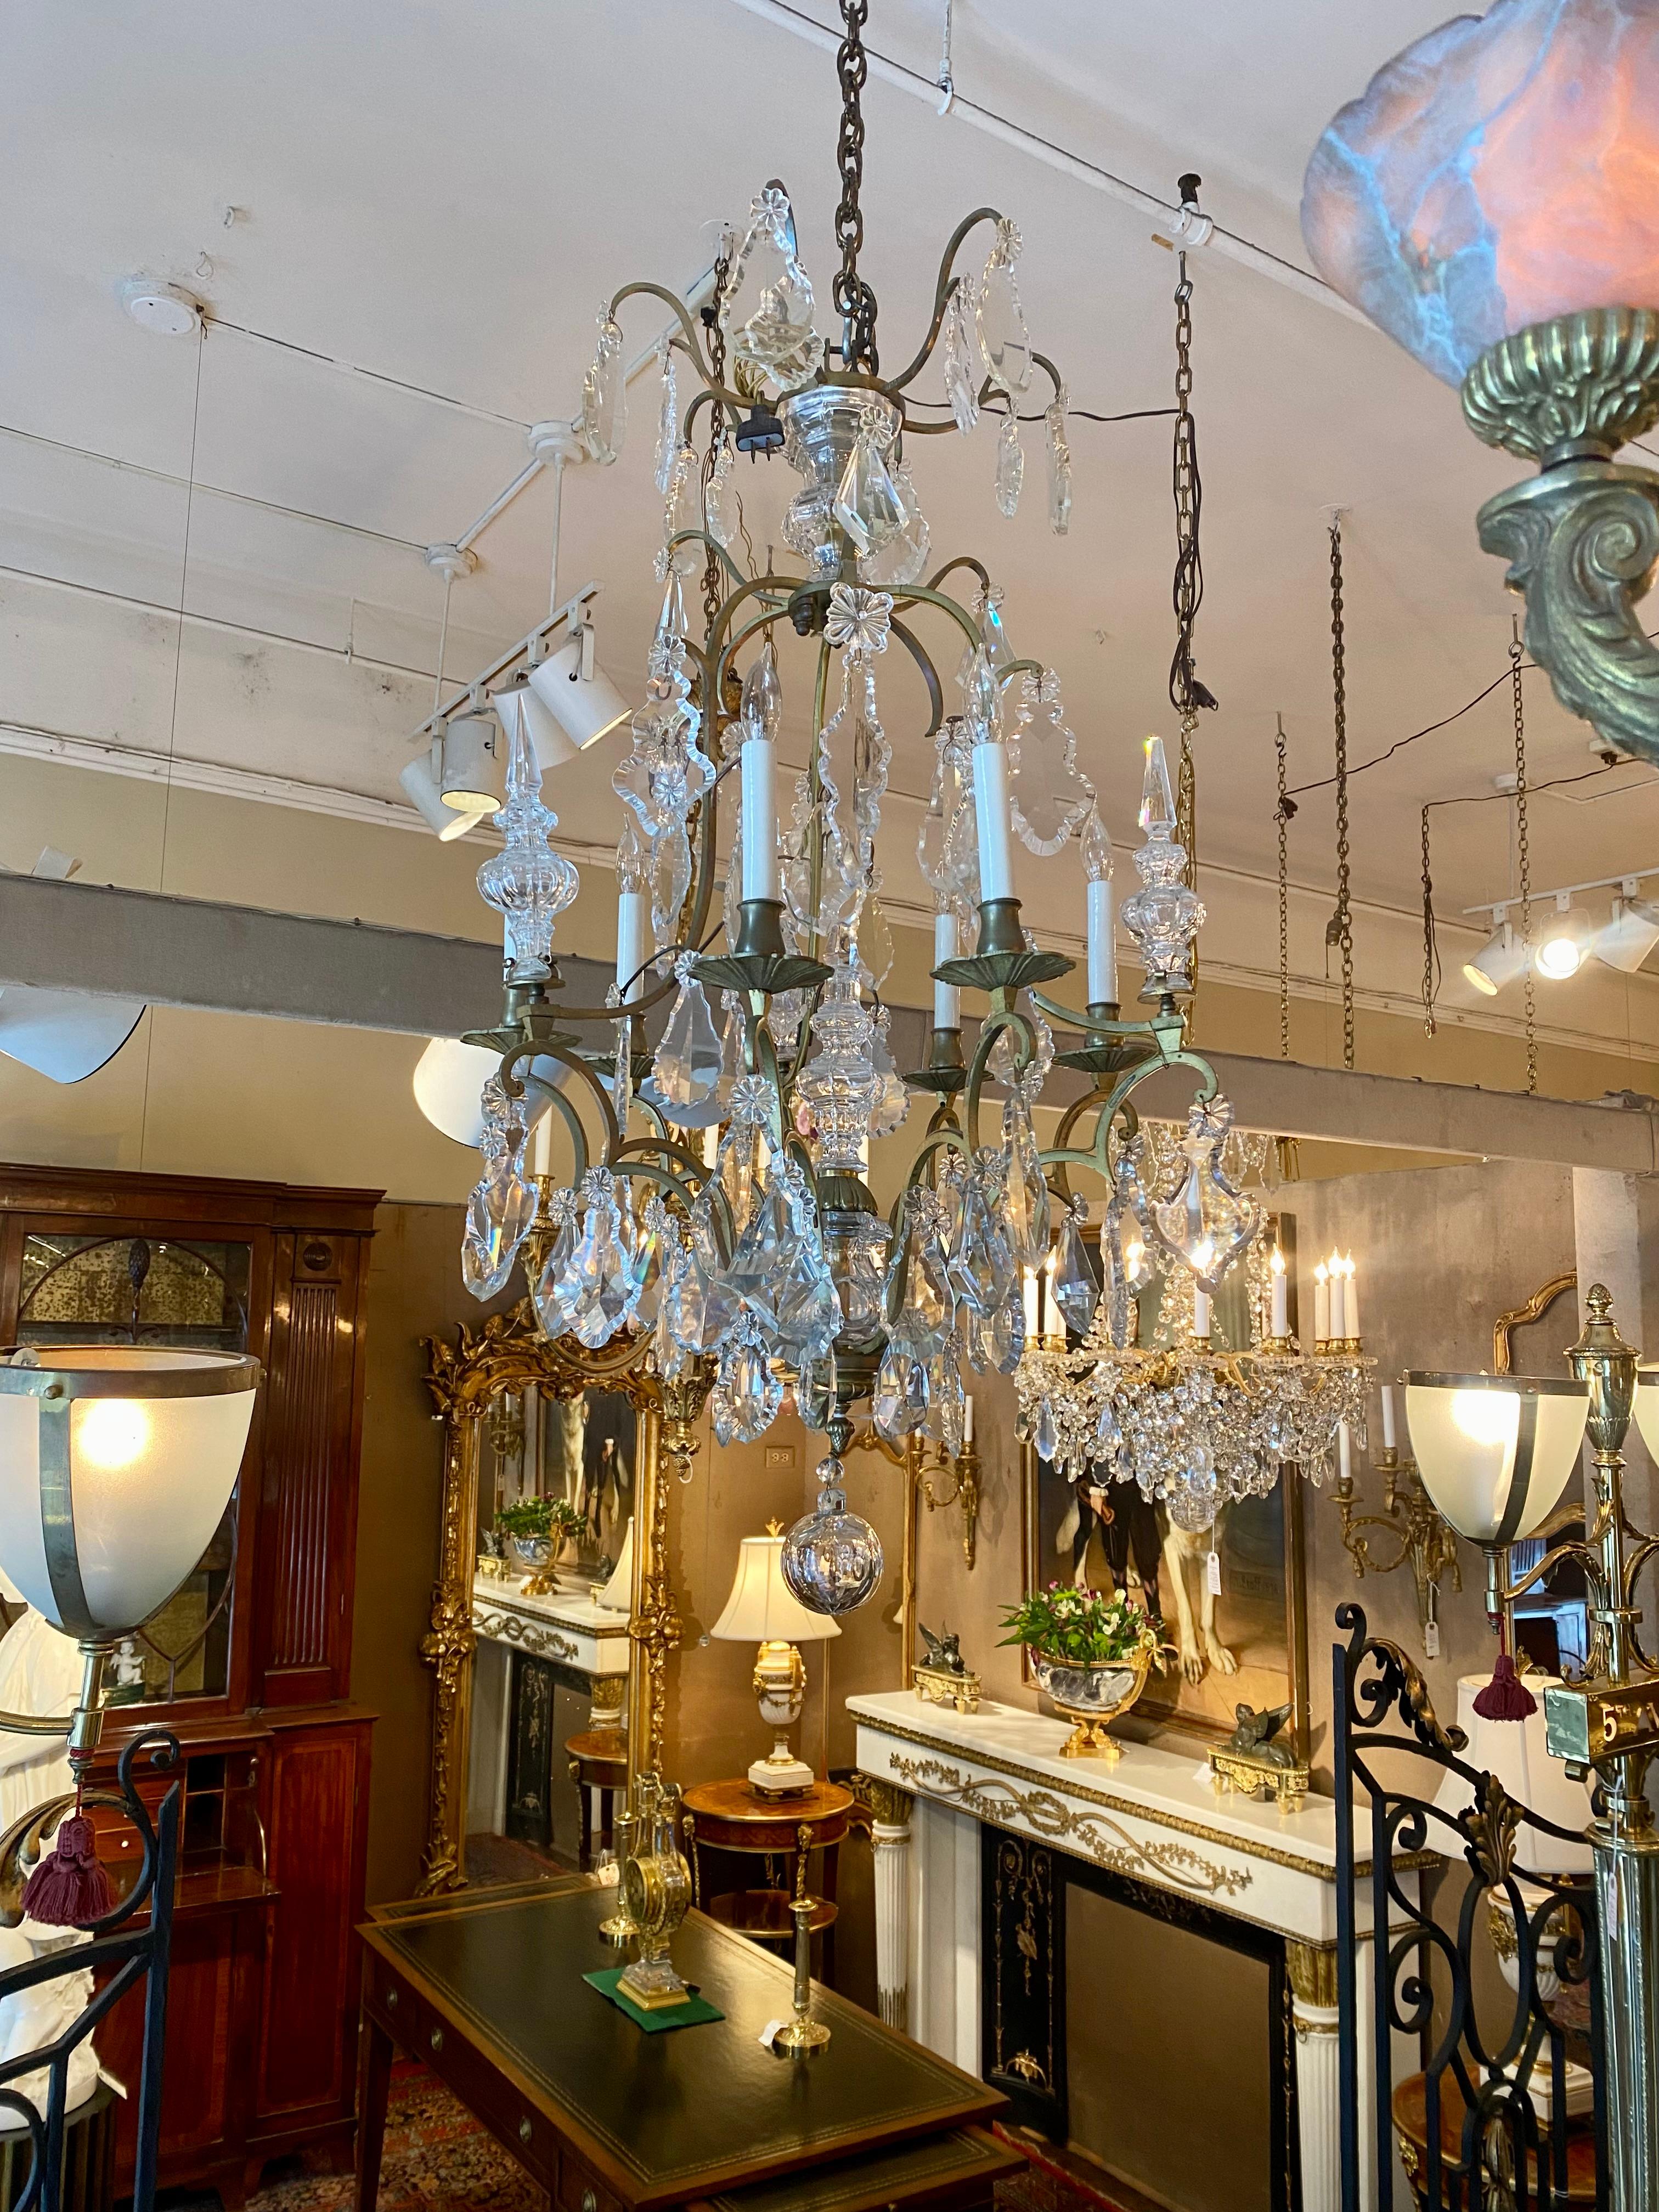 Antique French Baccarat Crystal and Bronze D' Ore Chandelier, circa 1880-1890 For Sale 2